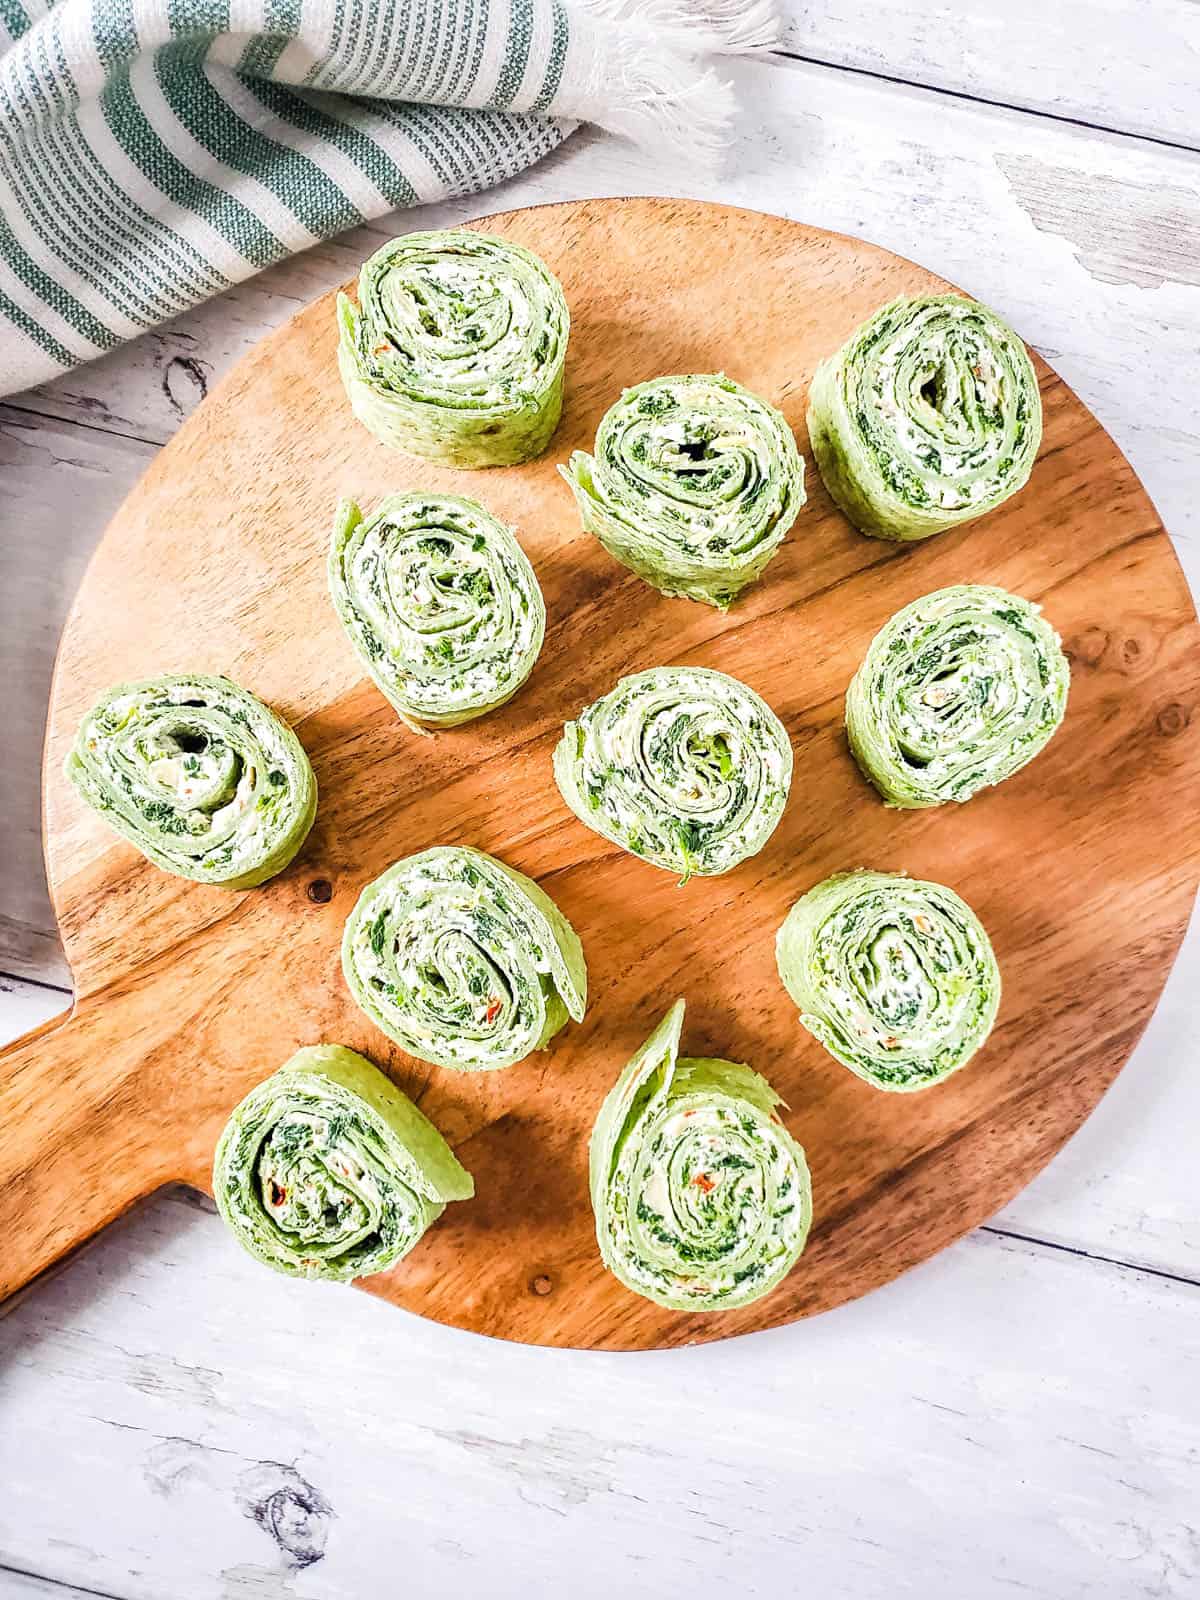 A wood platter containing spinach pinwheels.